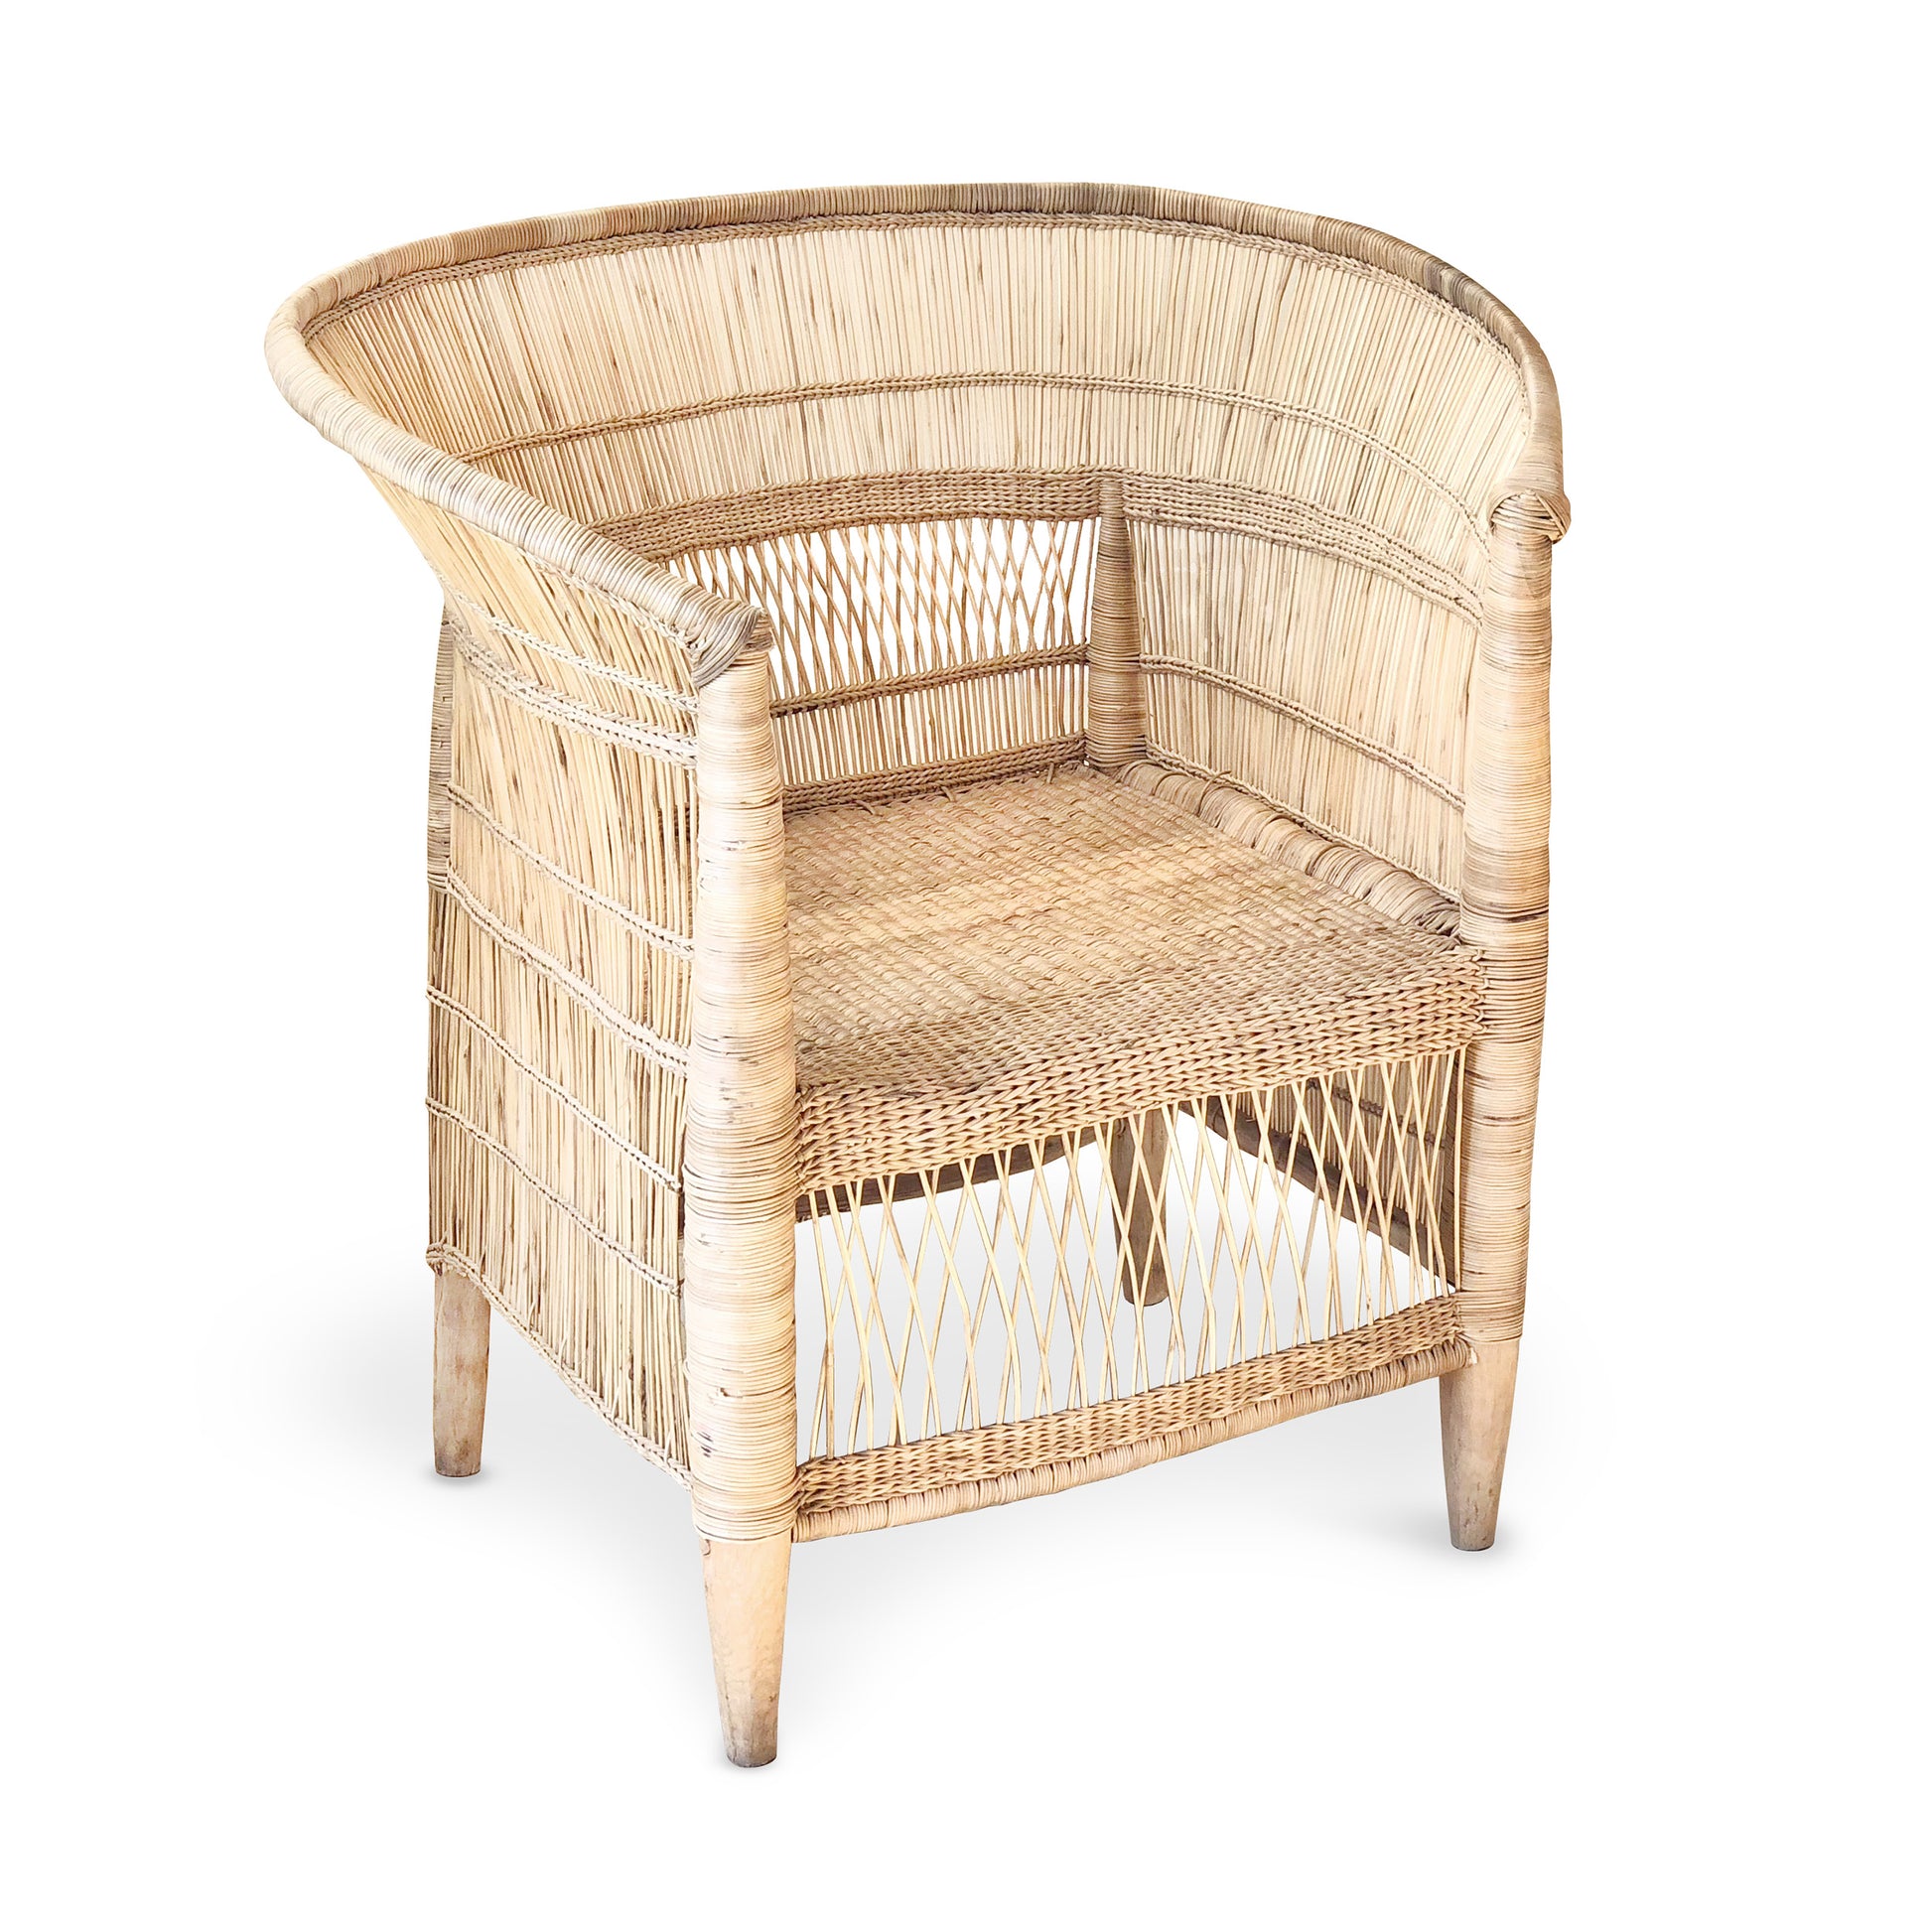 Traditional Malawi Cane Chair Furniture Chairs